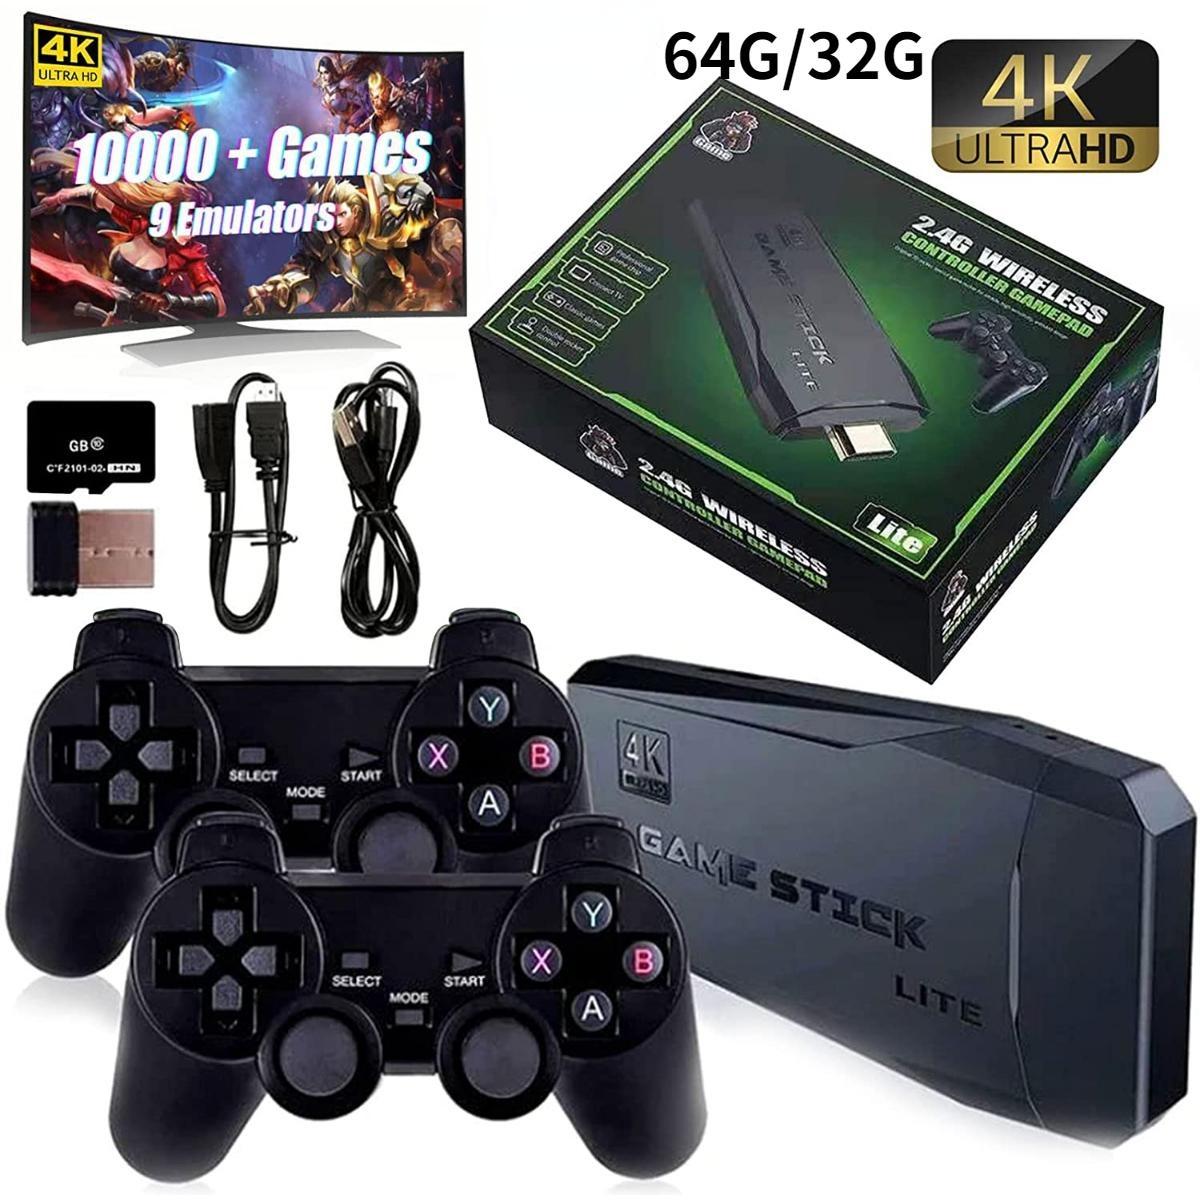 YAO JING Wireless Retro Game Console Built-in 10000  Classic Games, 4K HDMI TV Output with Dual 2.4G Wireless Controllers, 32G/64G Version Nostalgic Game Stick